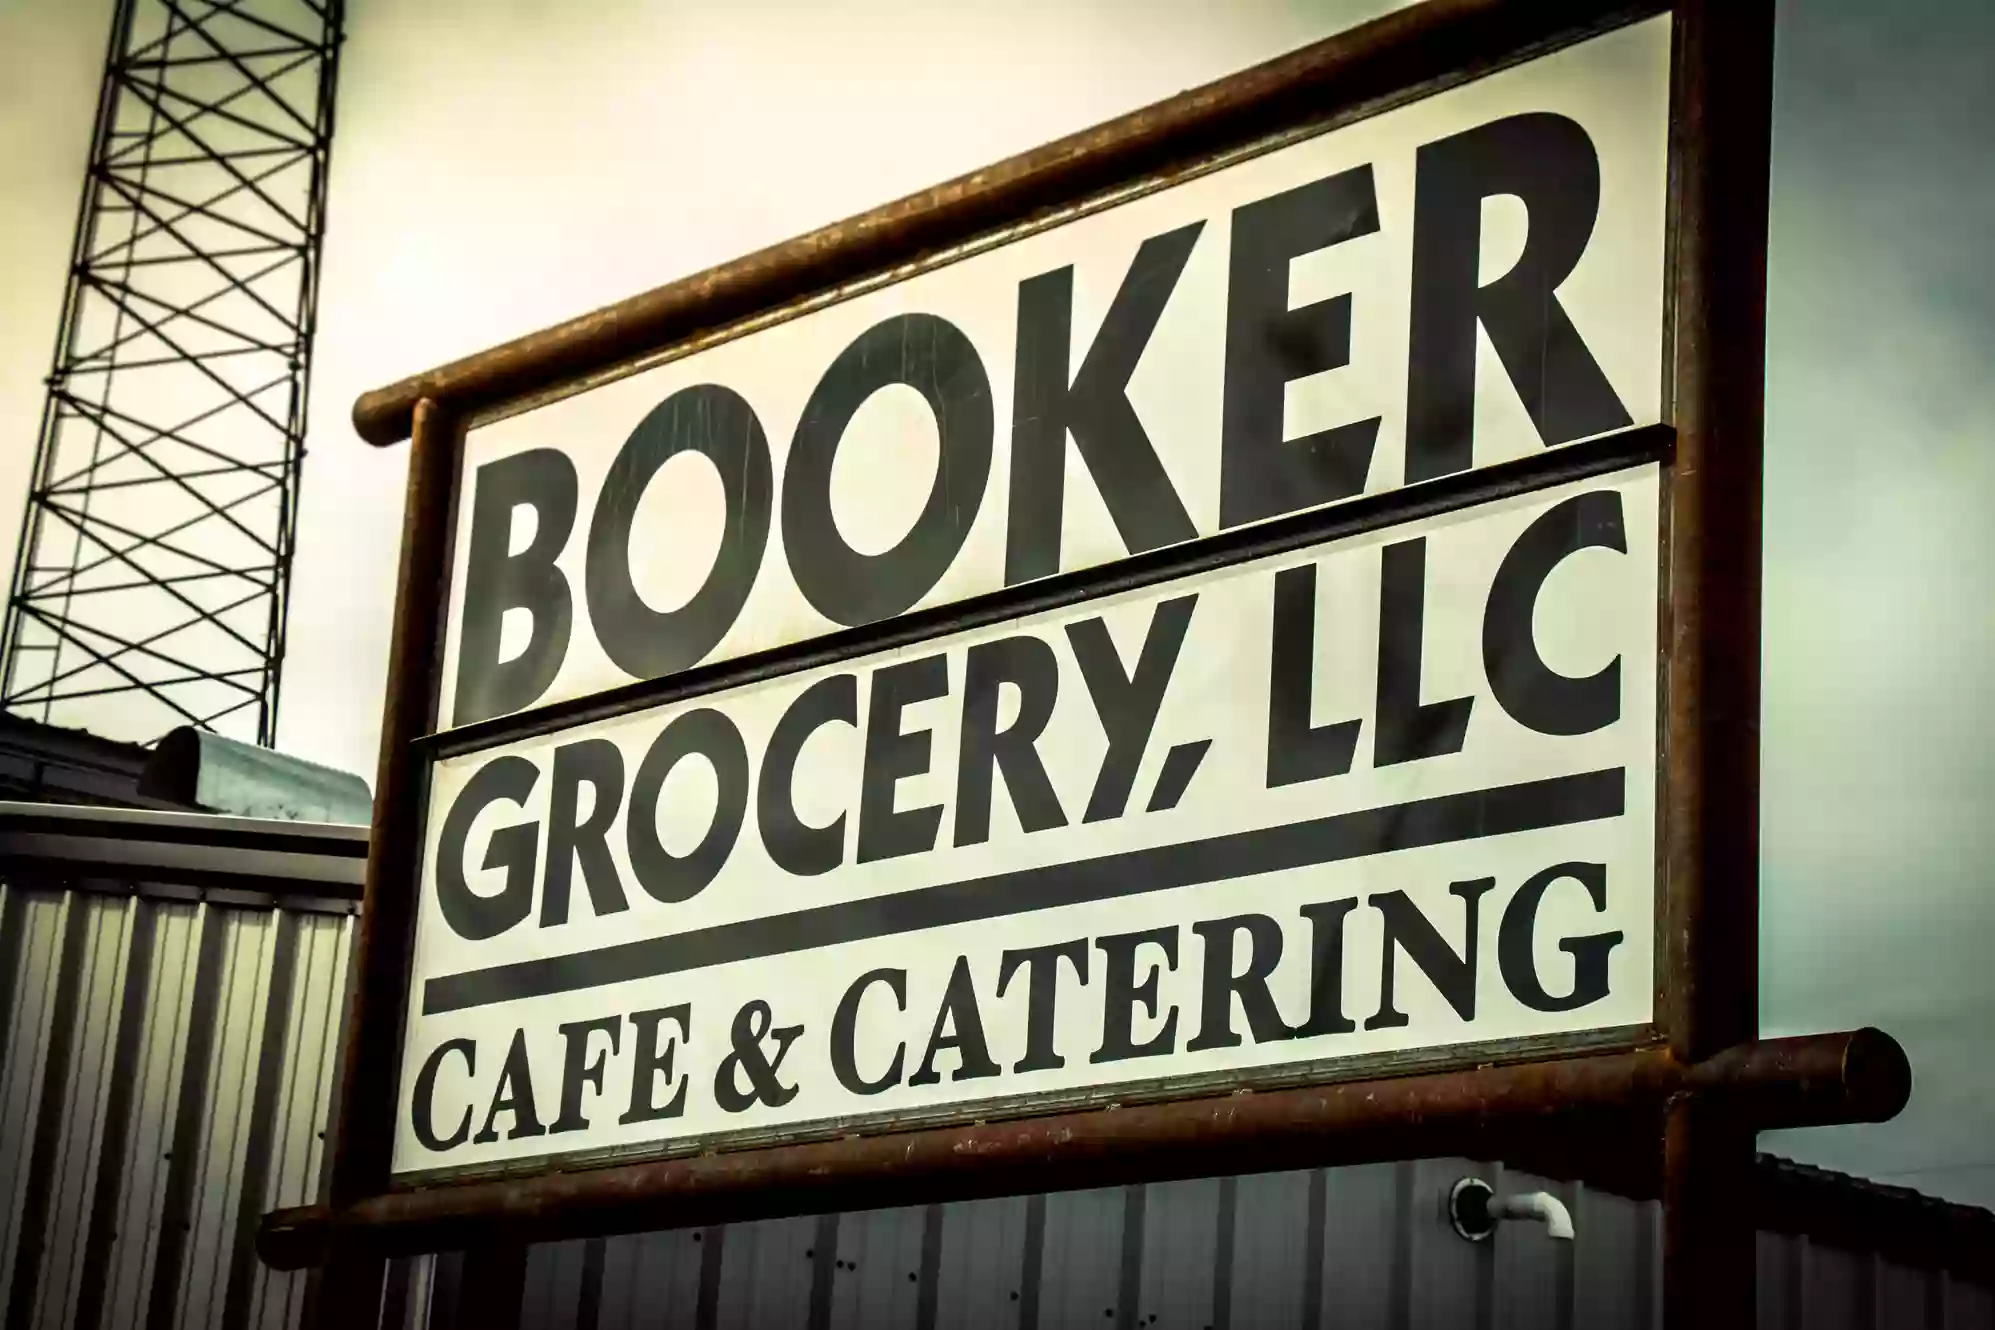 Booker Grocery Cafe & Catering